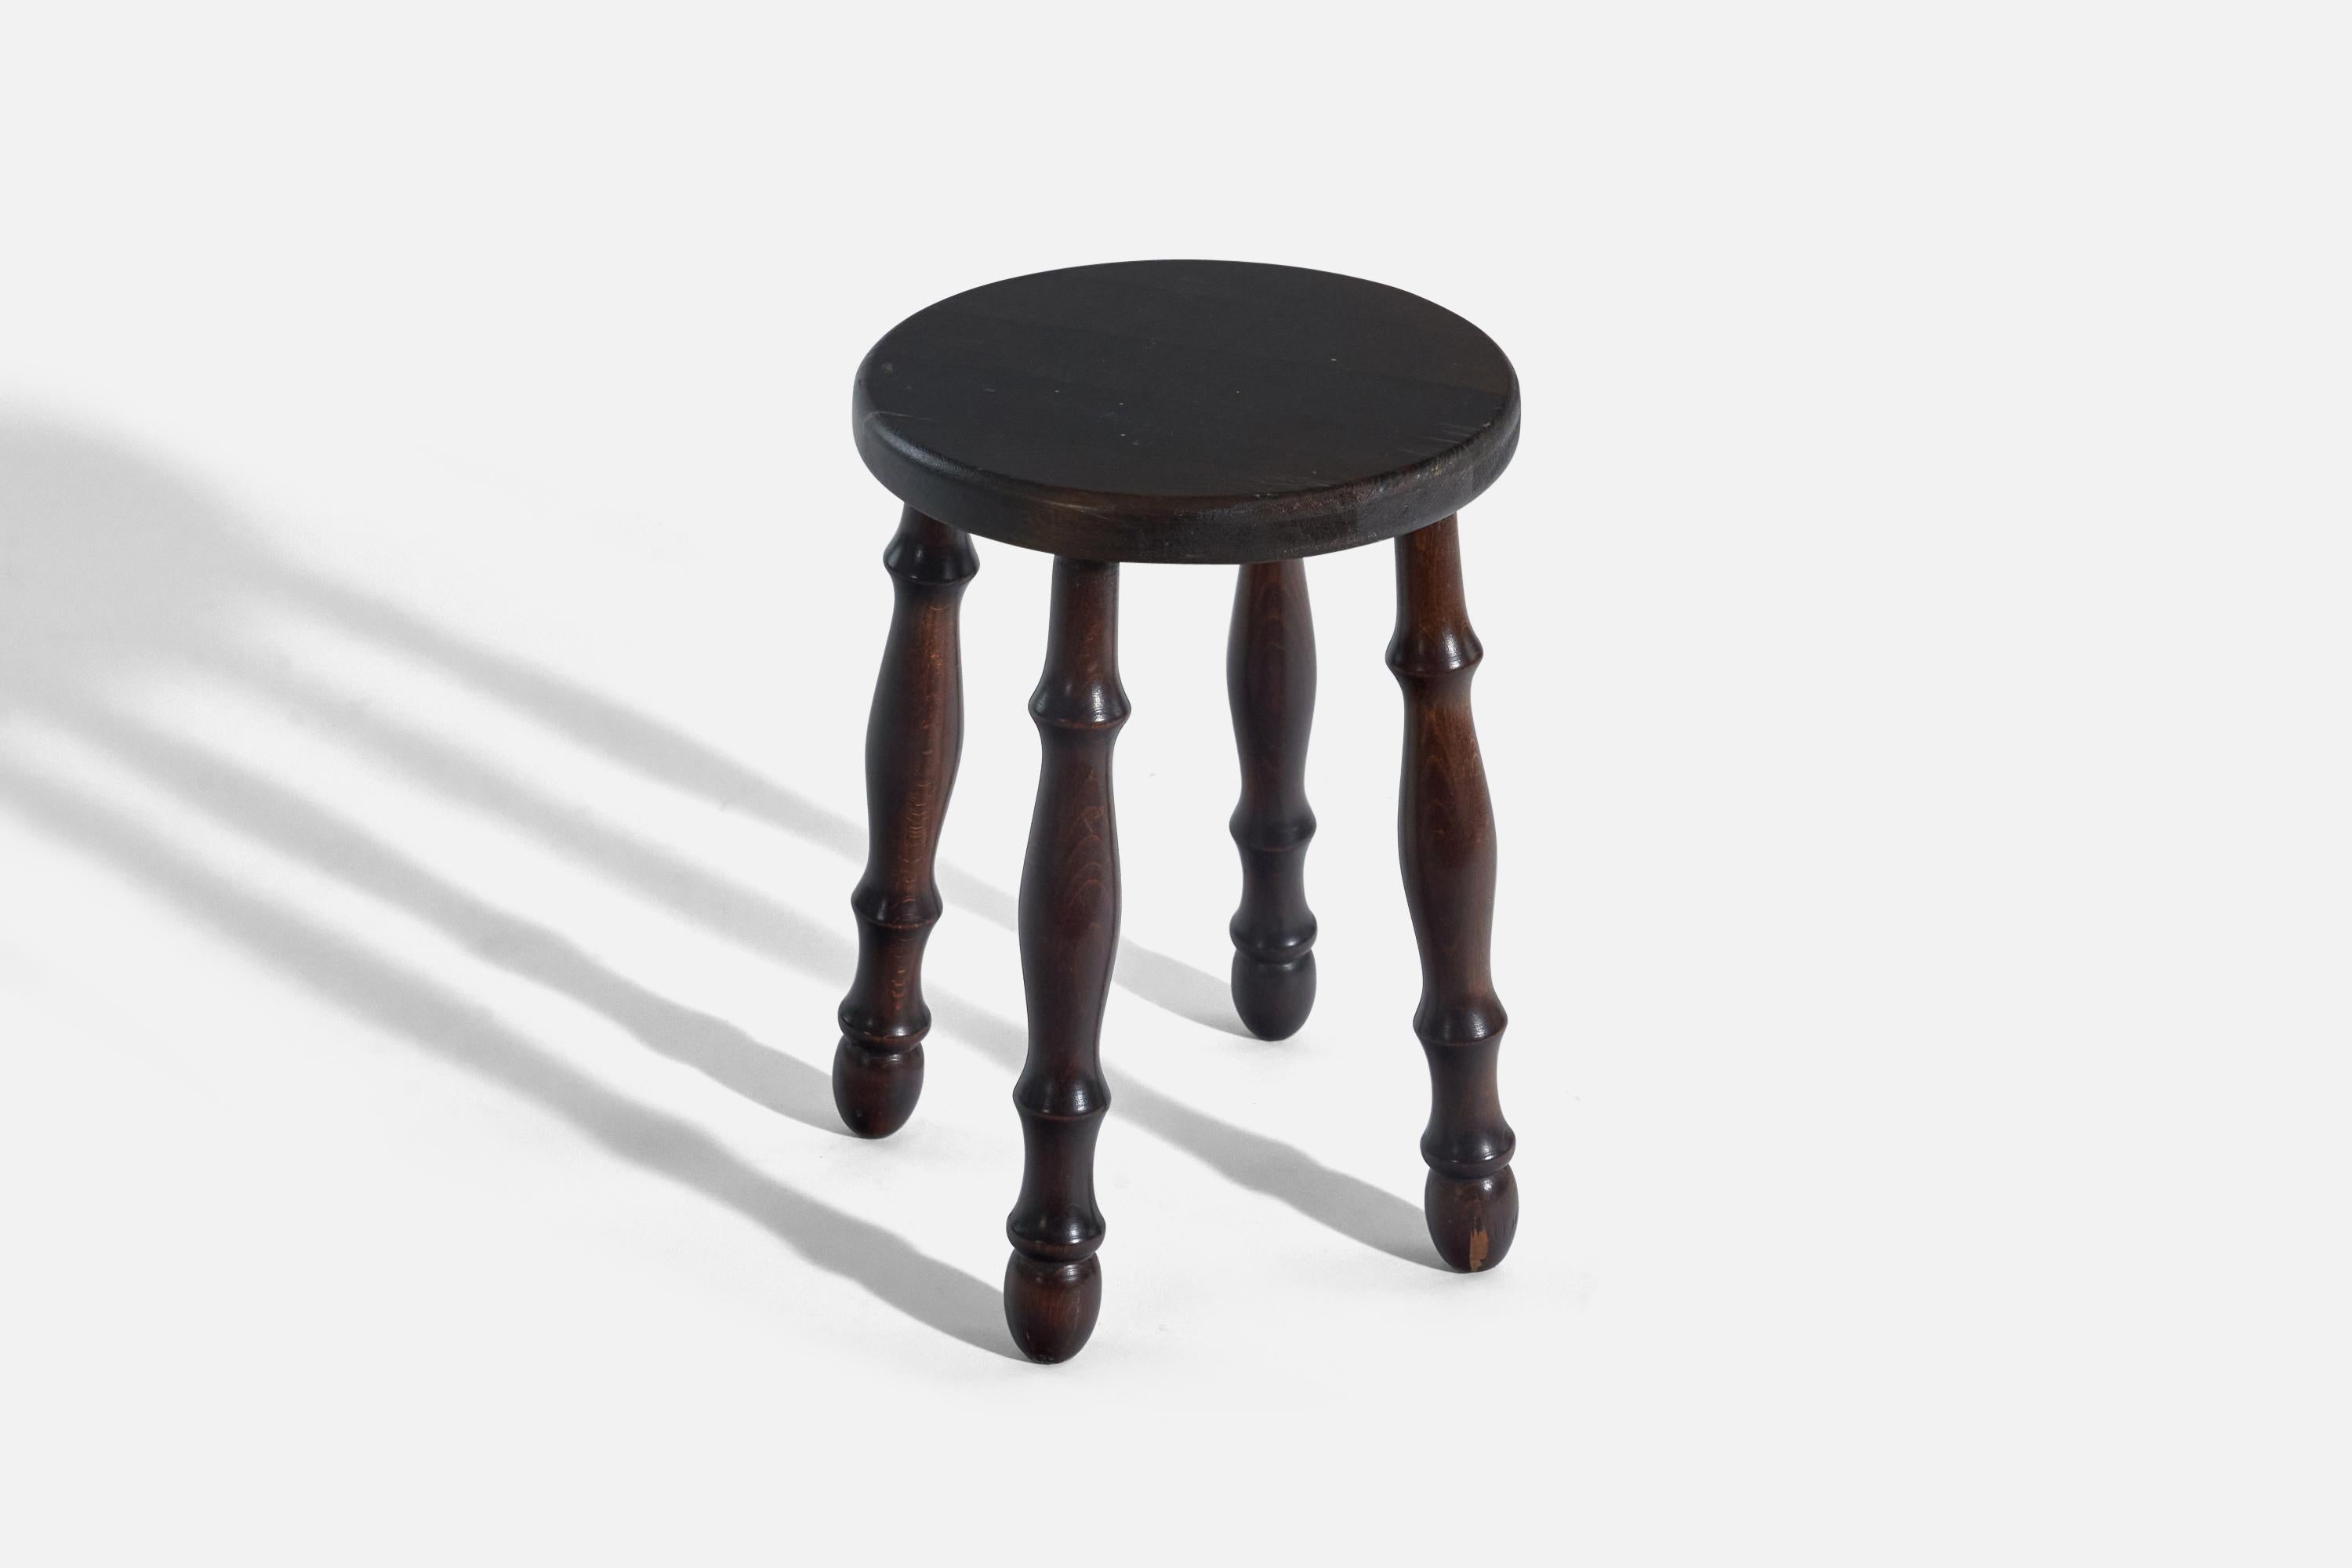 A dark-stained pine stool designed and produced in Sweden, c. 1970s.